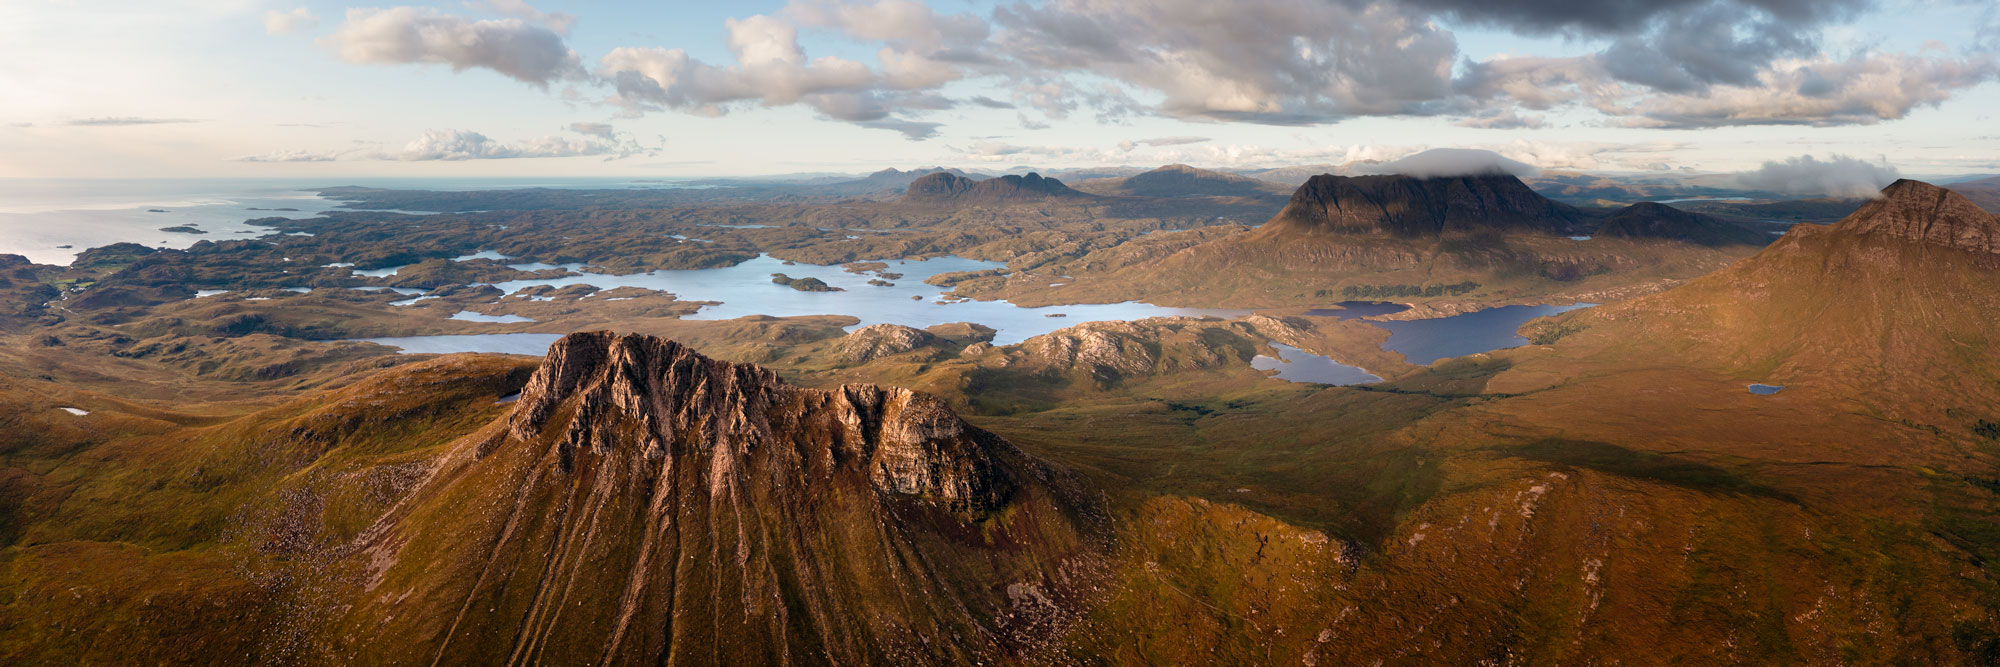 Stac Pollaidh mountain in Assynt in the Scottish highlands